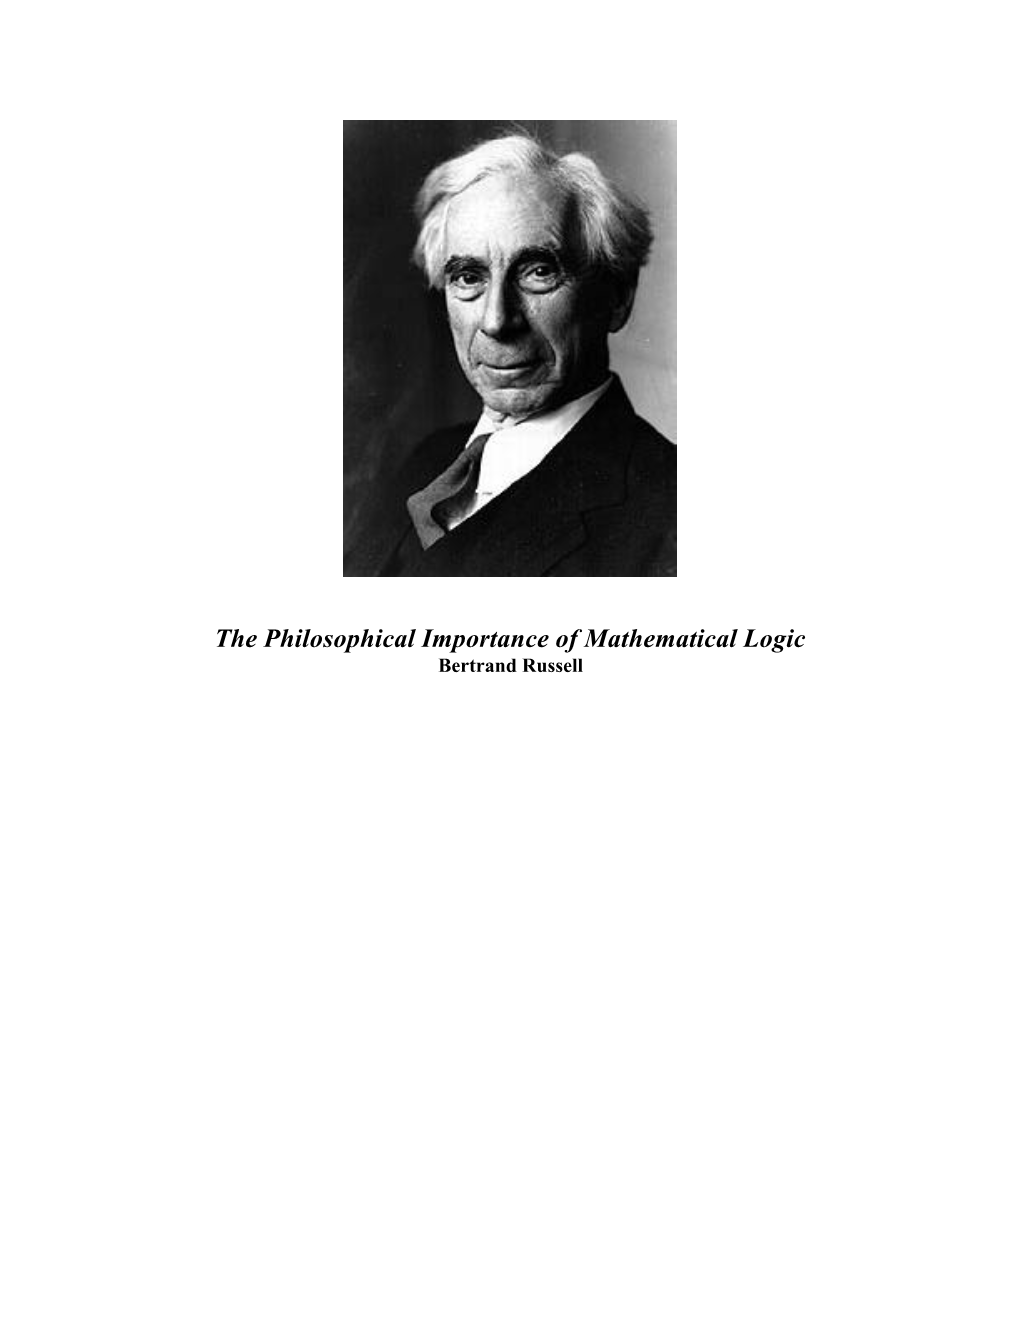 The Philosophical Importance of Mathematical Logic Bertrand Russell in SPEAKING of "Mathematical Logic", I Use This Word in a Very Broad Sense